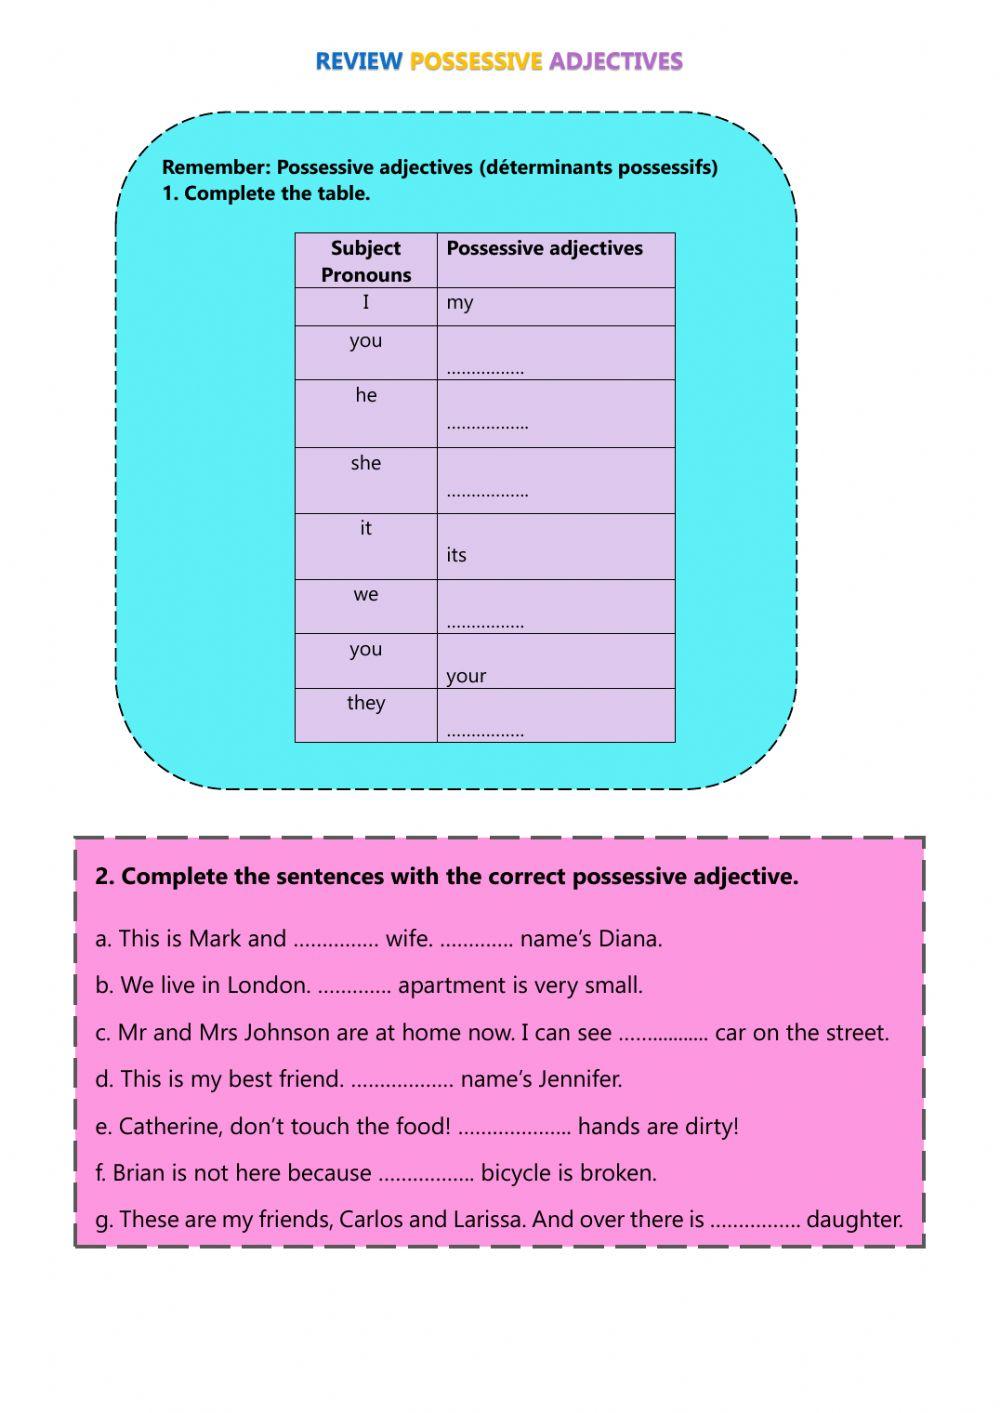 Review Possessive Adjectives